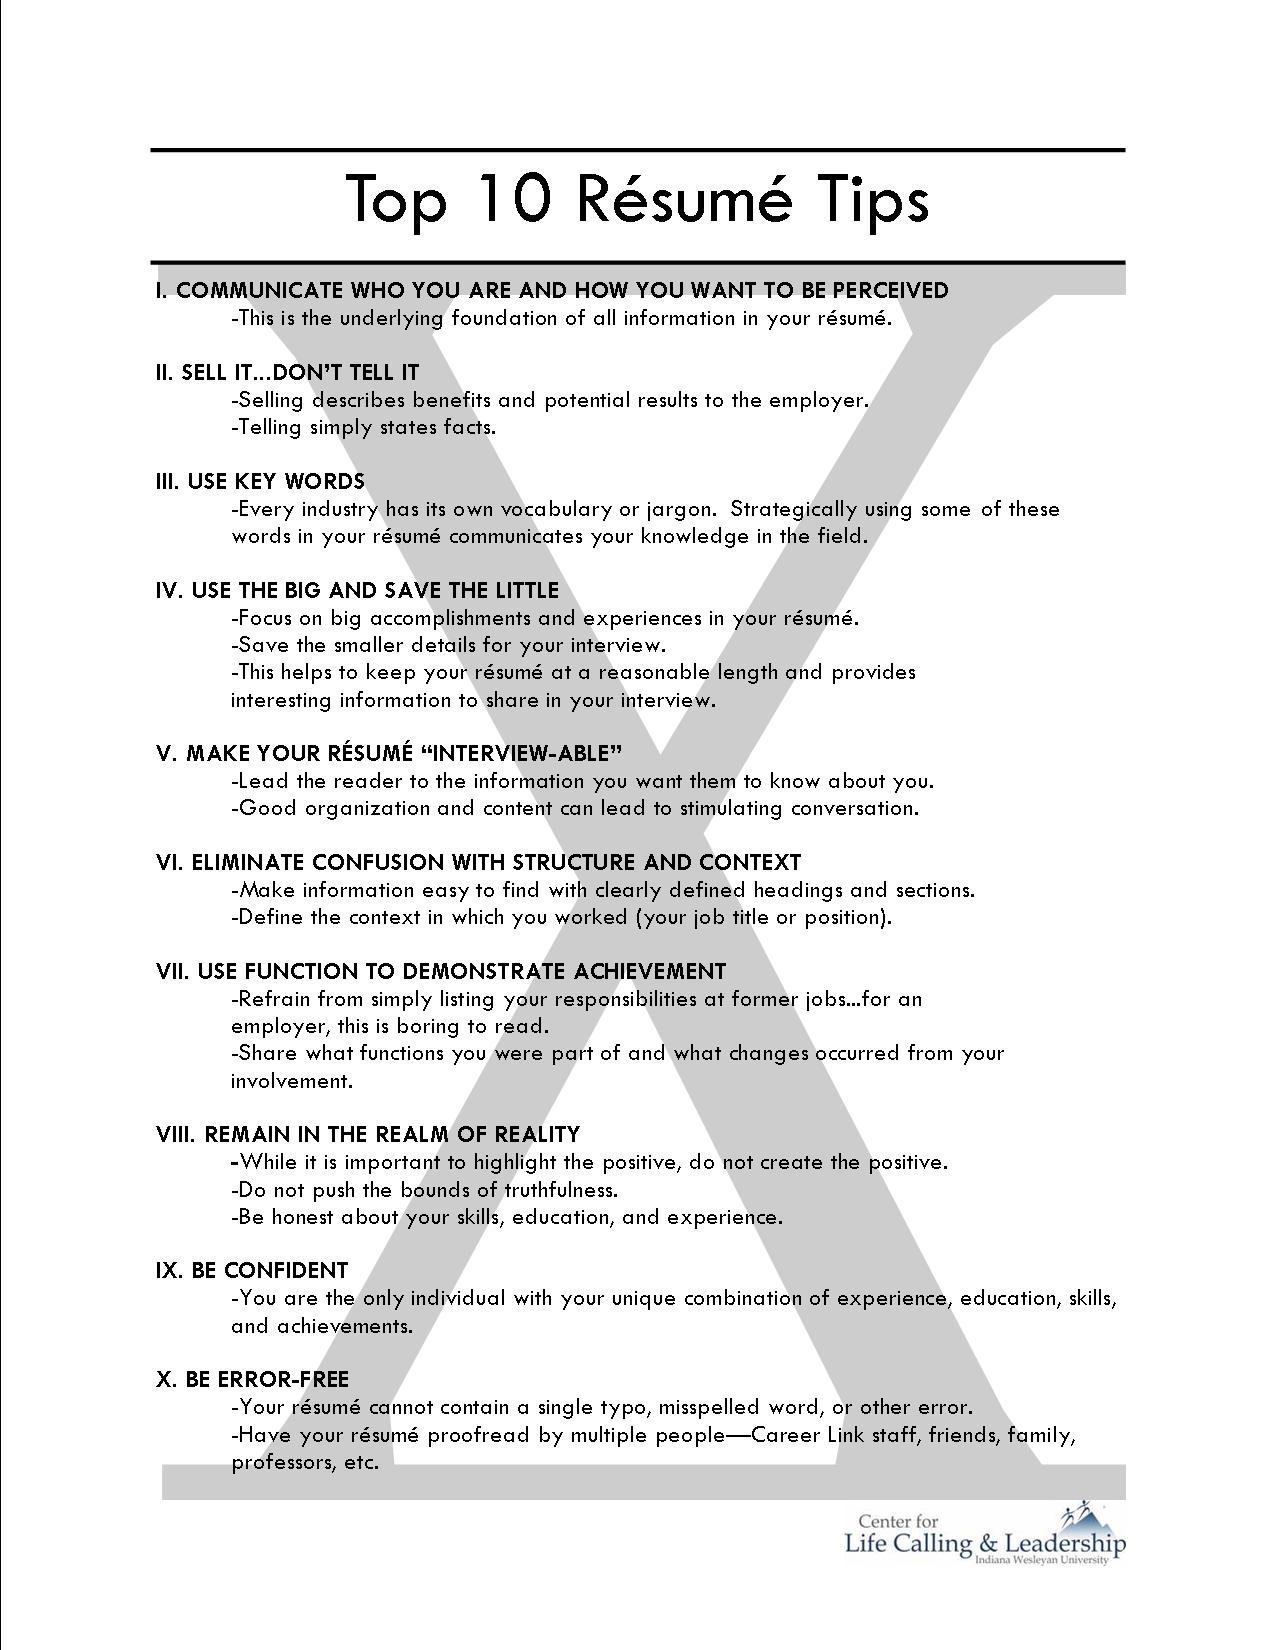 Cv writing and interview tips